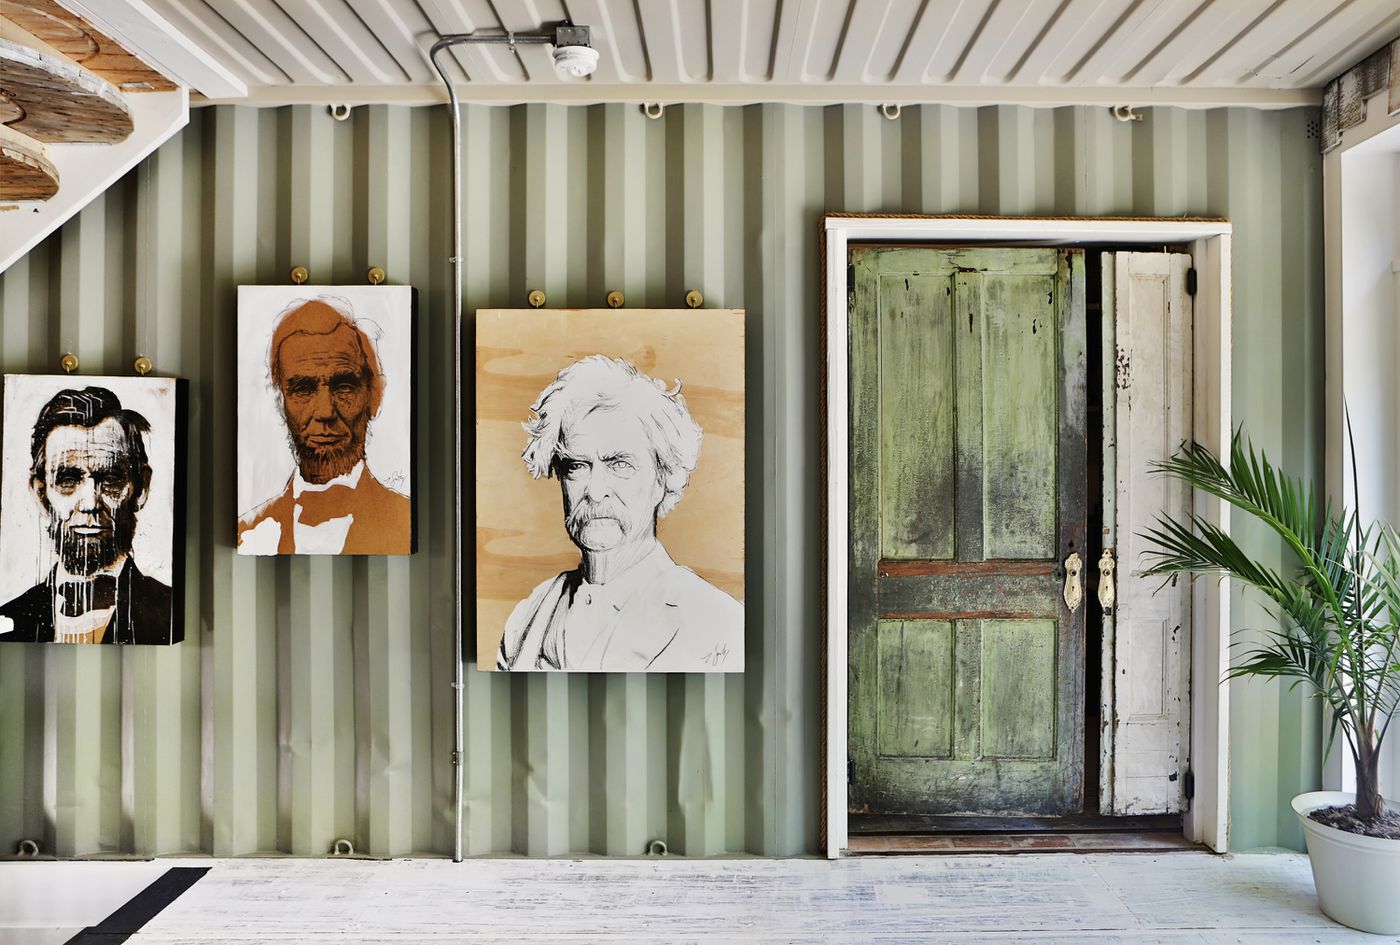 The couple who built the shipping container house left some metal walls exposed. Here, you see light-green metal walls and a white metal ceiling. Artwork by owner Zach Smithey, showing portraits of Abraham Lincoln and Mark Twain, decorates the walls.